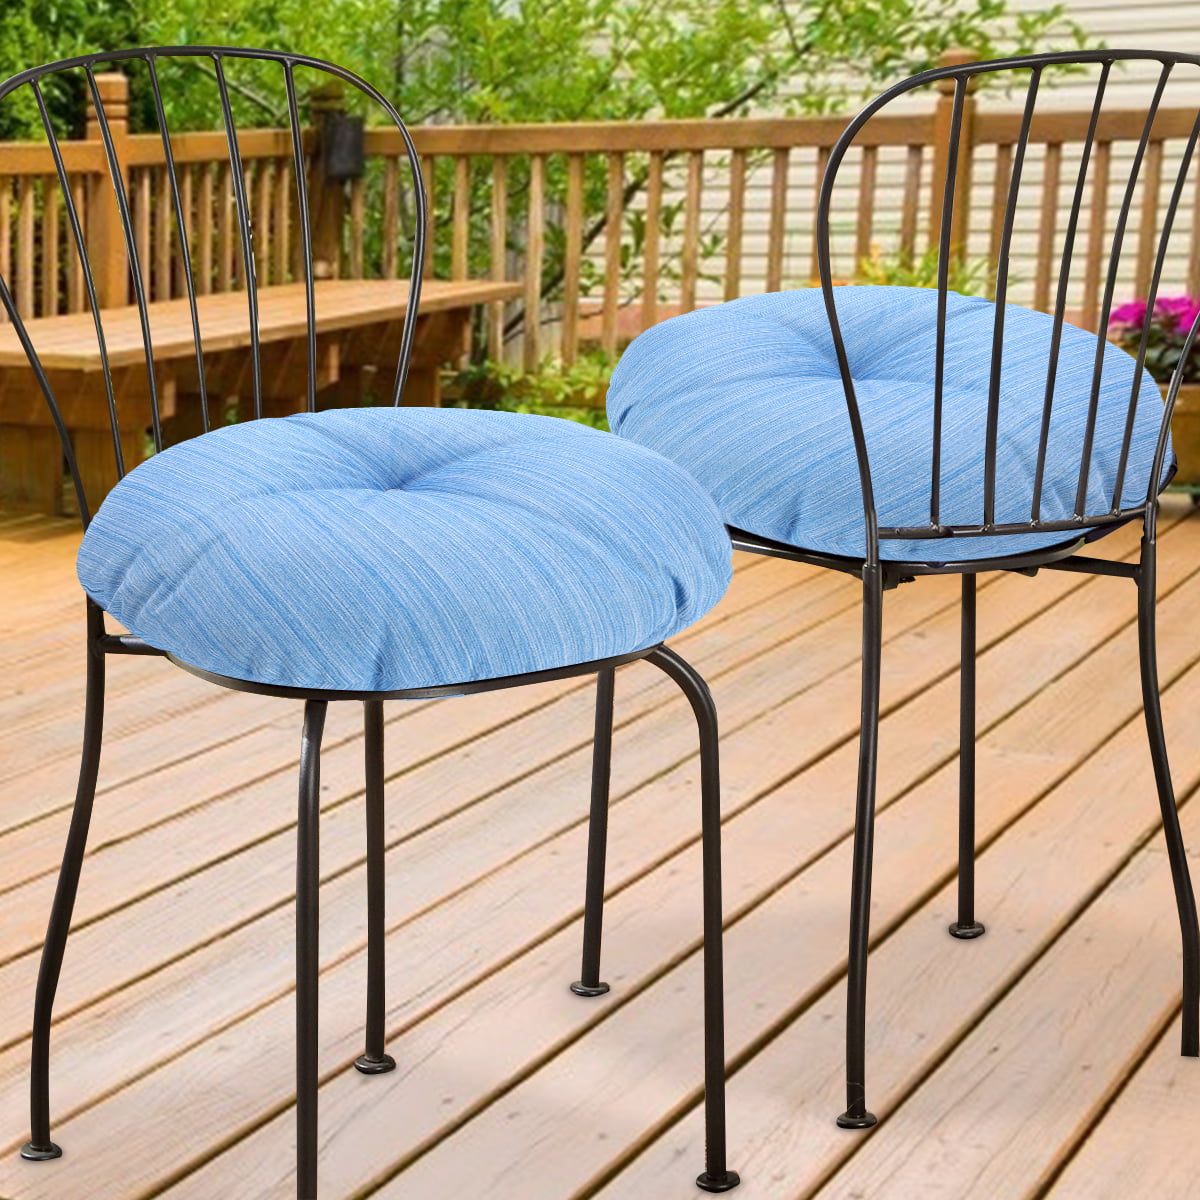 US Round Garden Chair Pad Indoor Outdoor Bistro Stool Patio Dining Home Seat Pad 